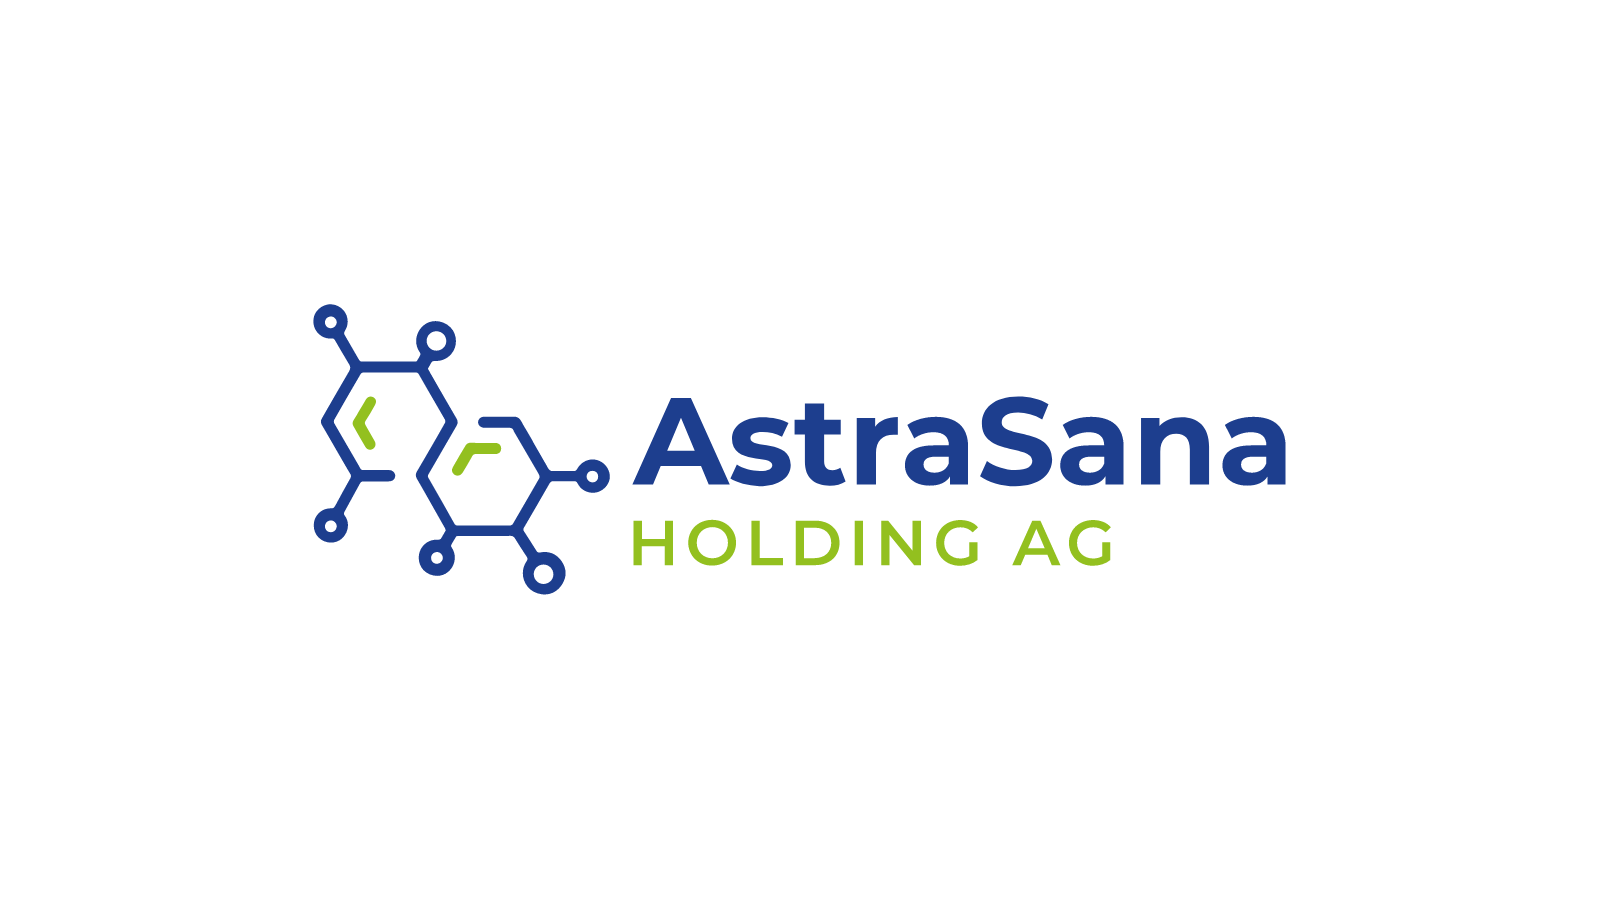 Astrasana AG and Solumedics AG have launched a new strategic partnership enabling the importation of medical cannabis to Switzerland.